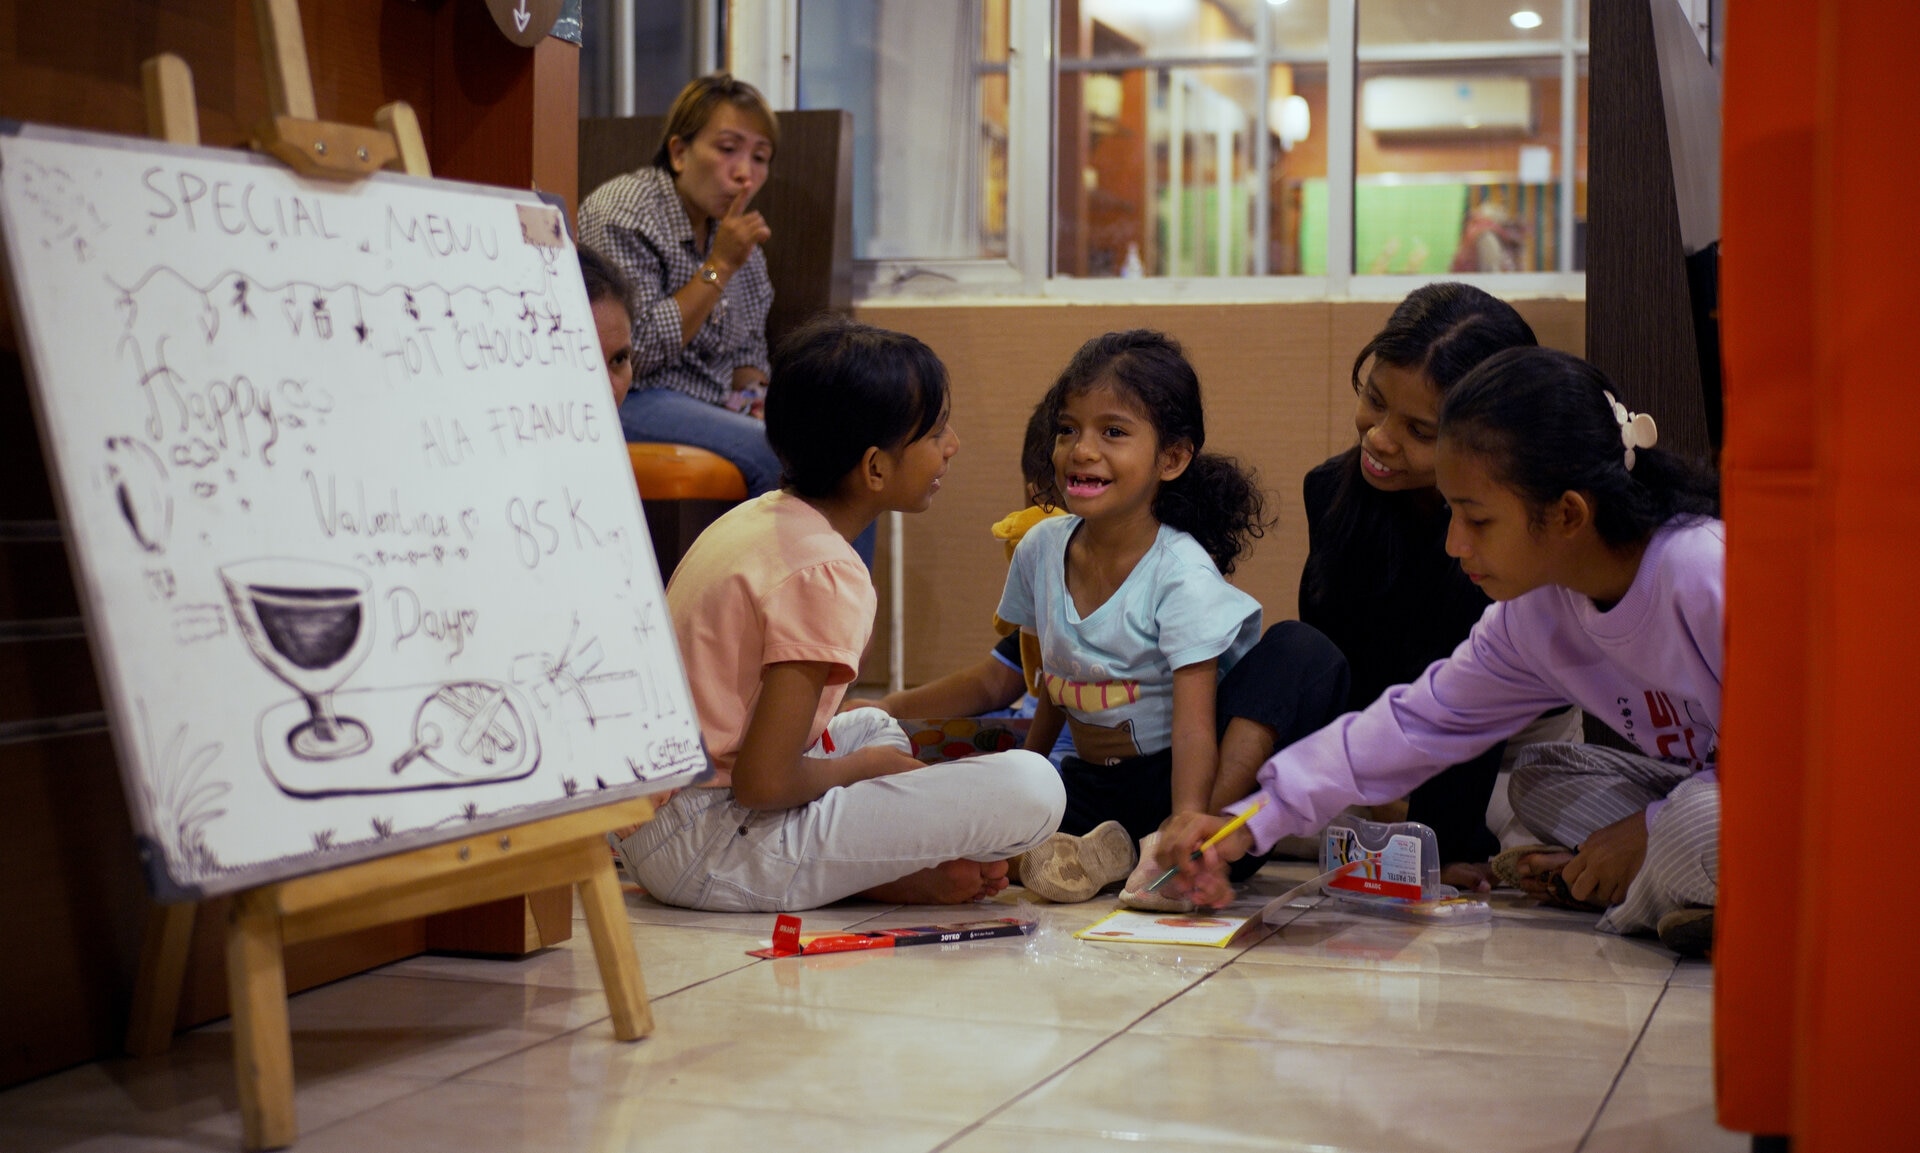 CafeIn hosts weekly playdates for deaf children for educational play and psychosocial stimulation, including learning BISINDO (sign language).